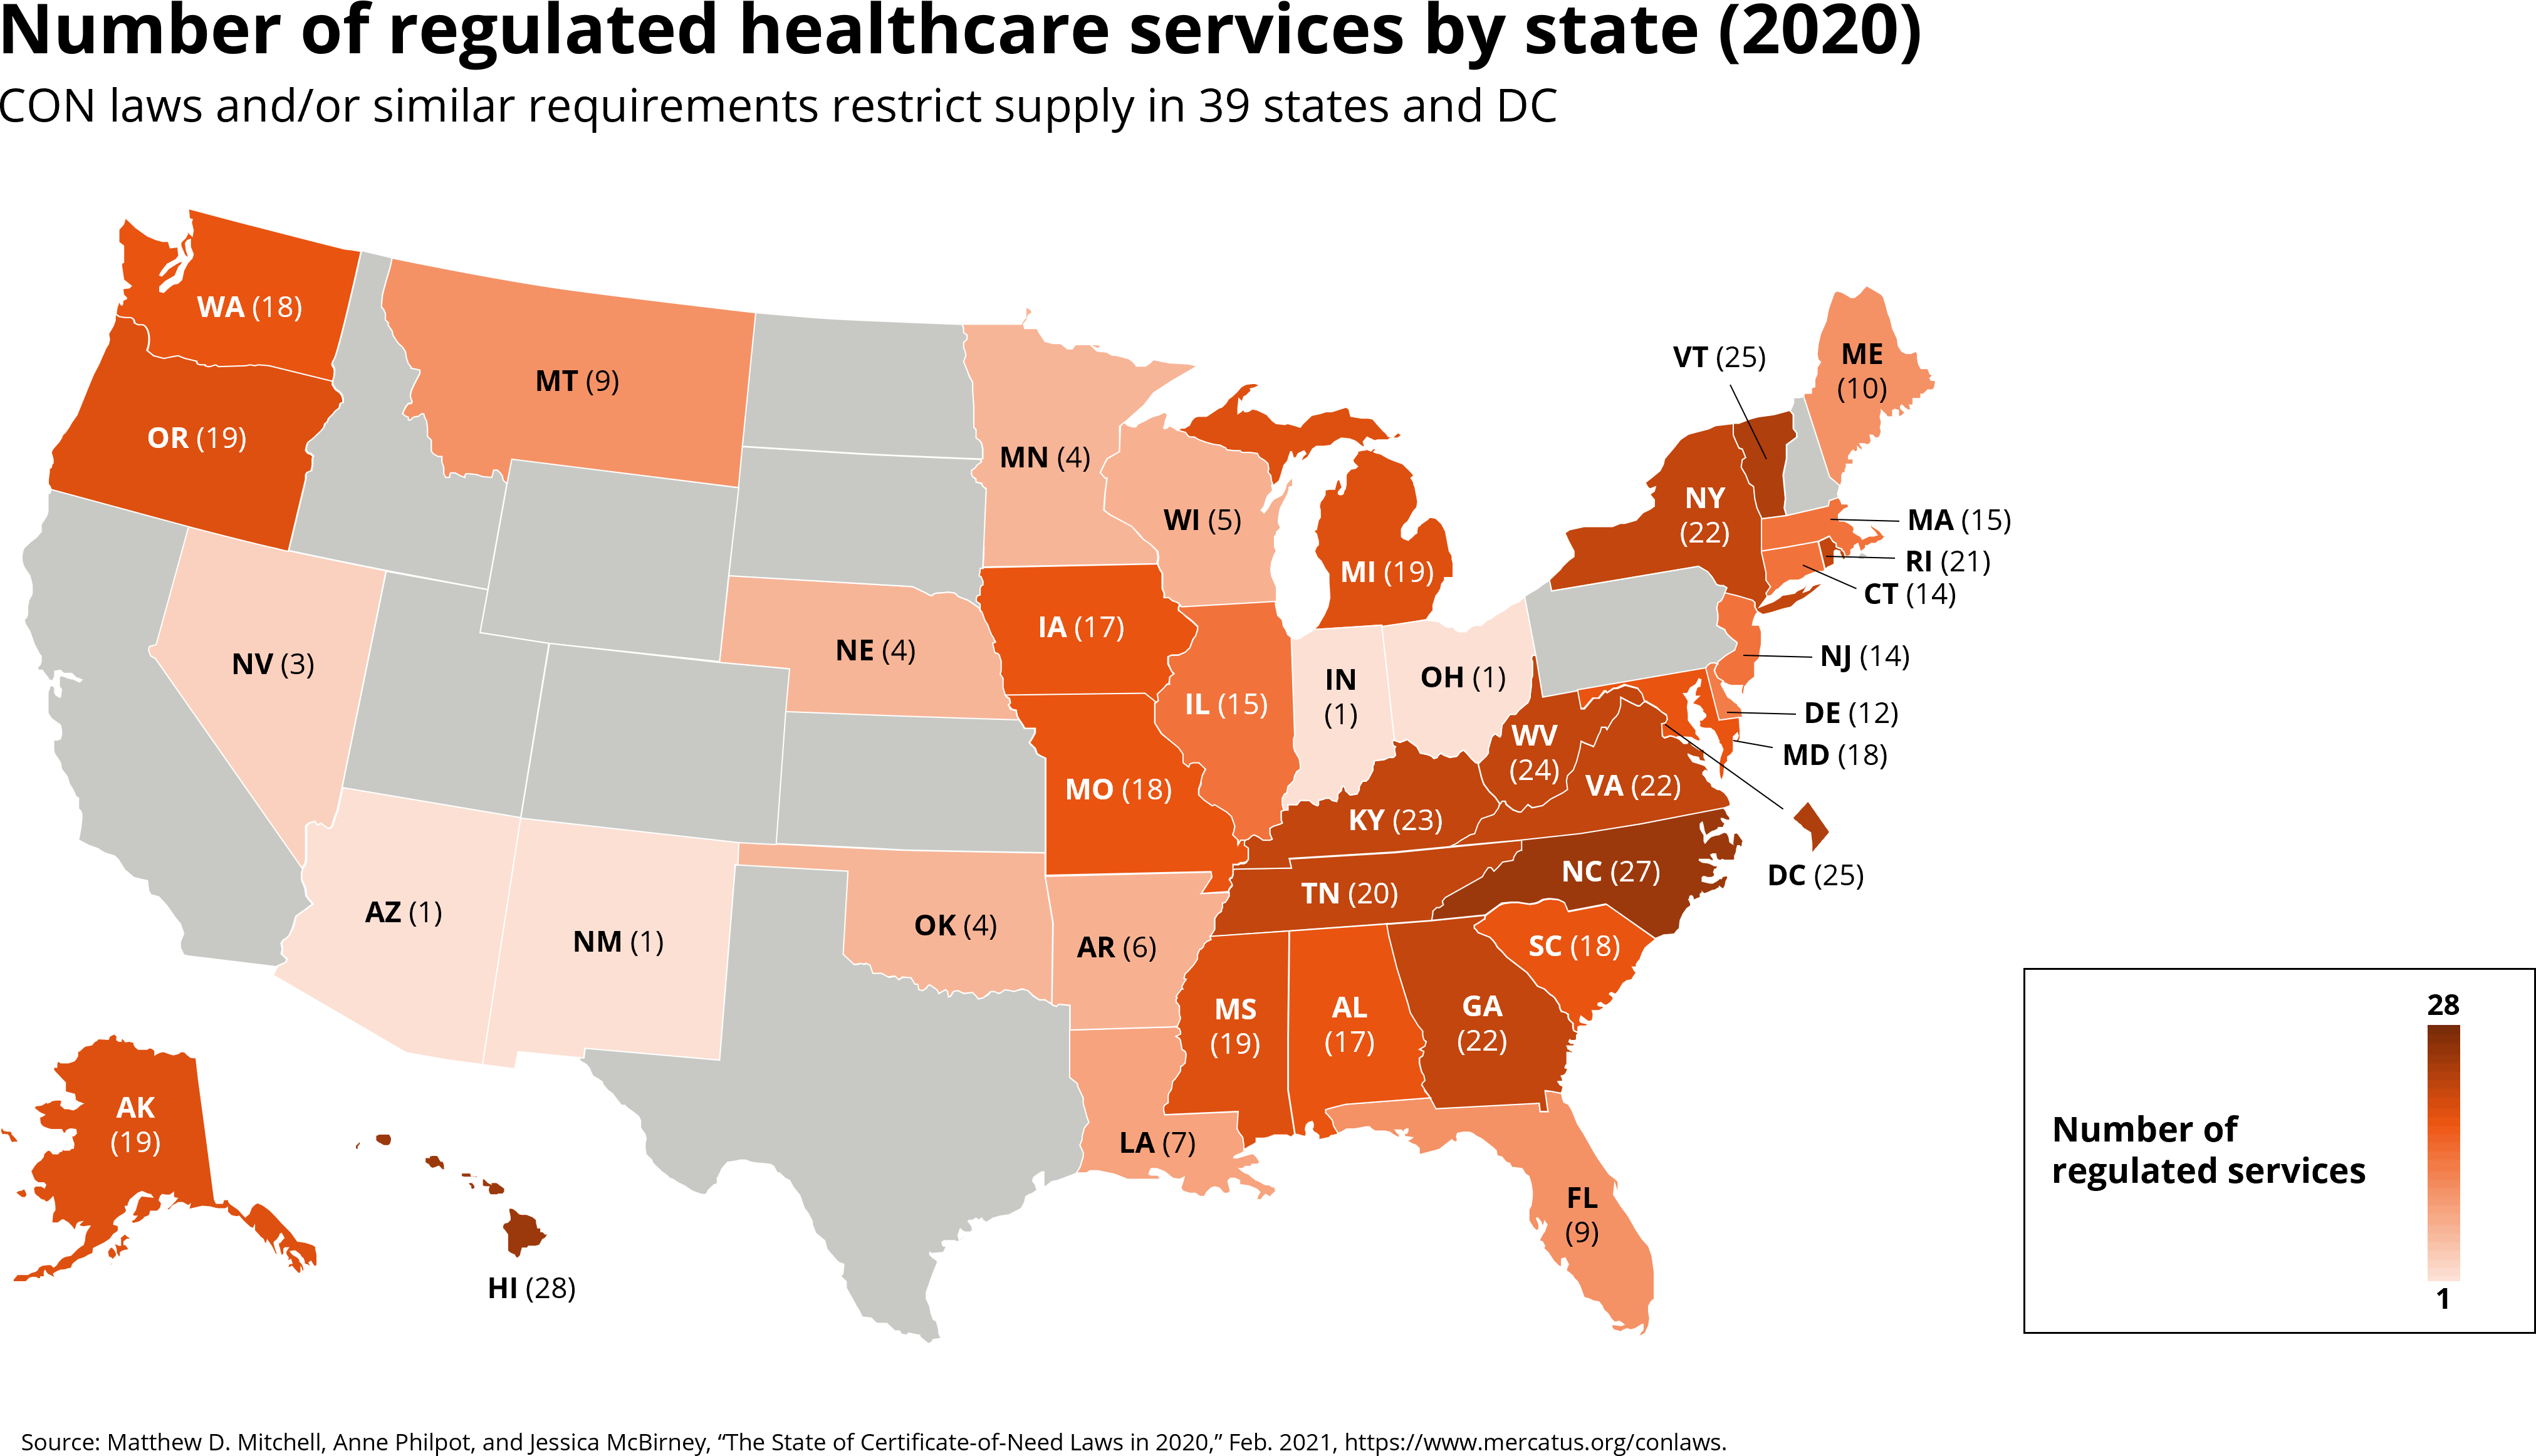 Heat map of regulated healthcare services by state in 2020